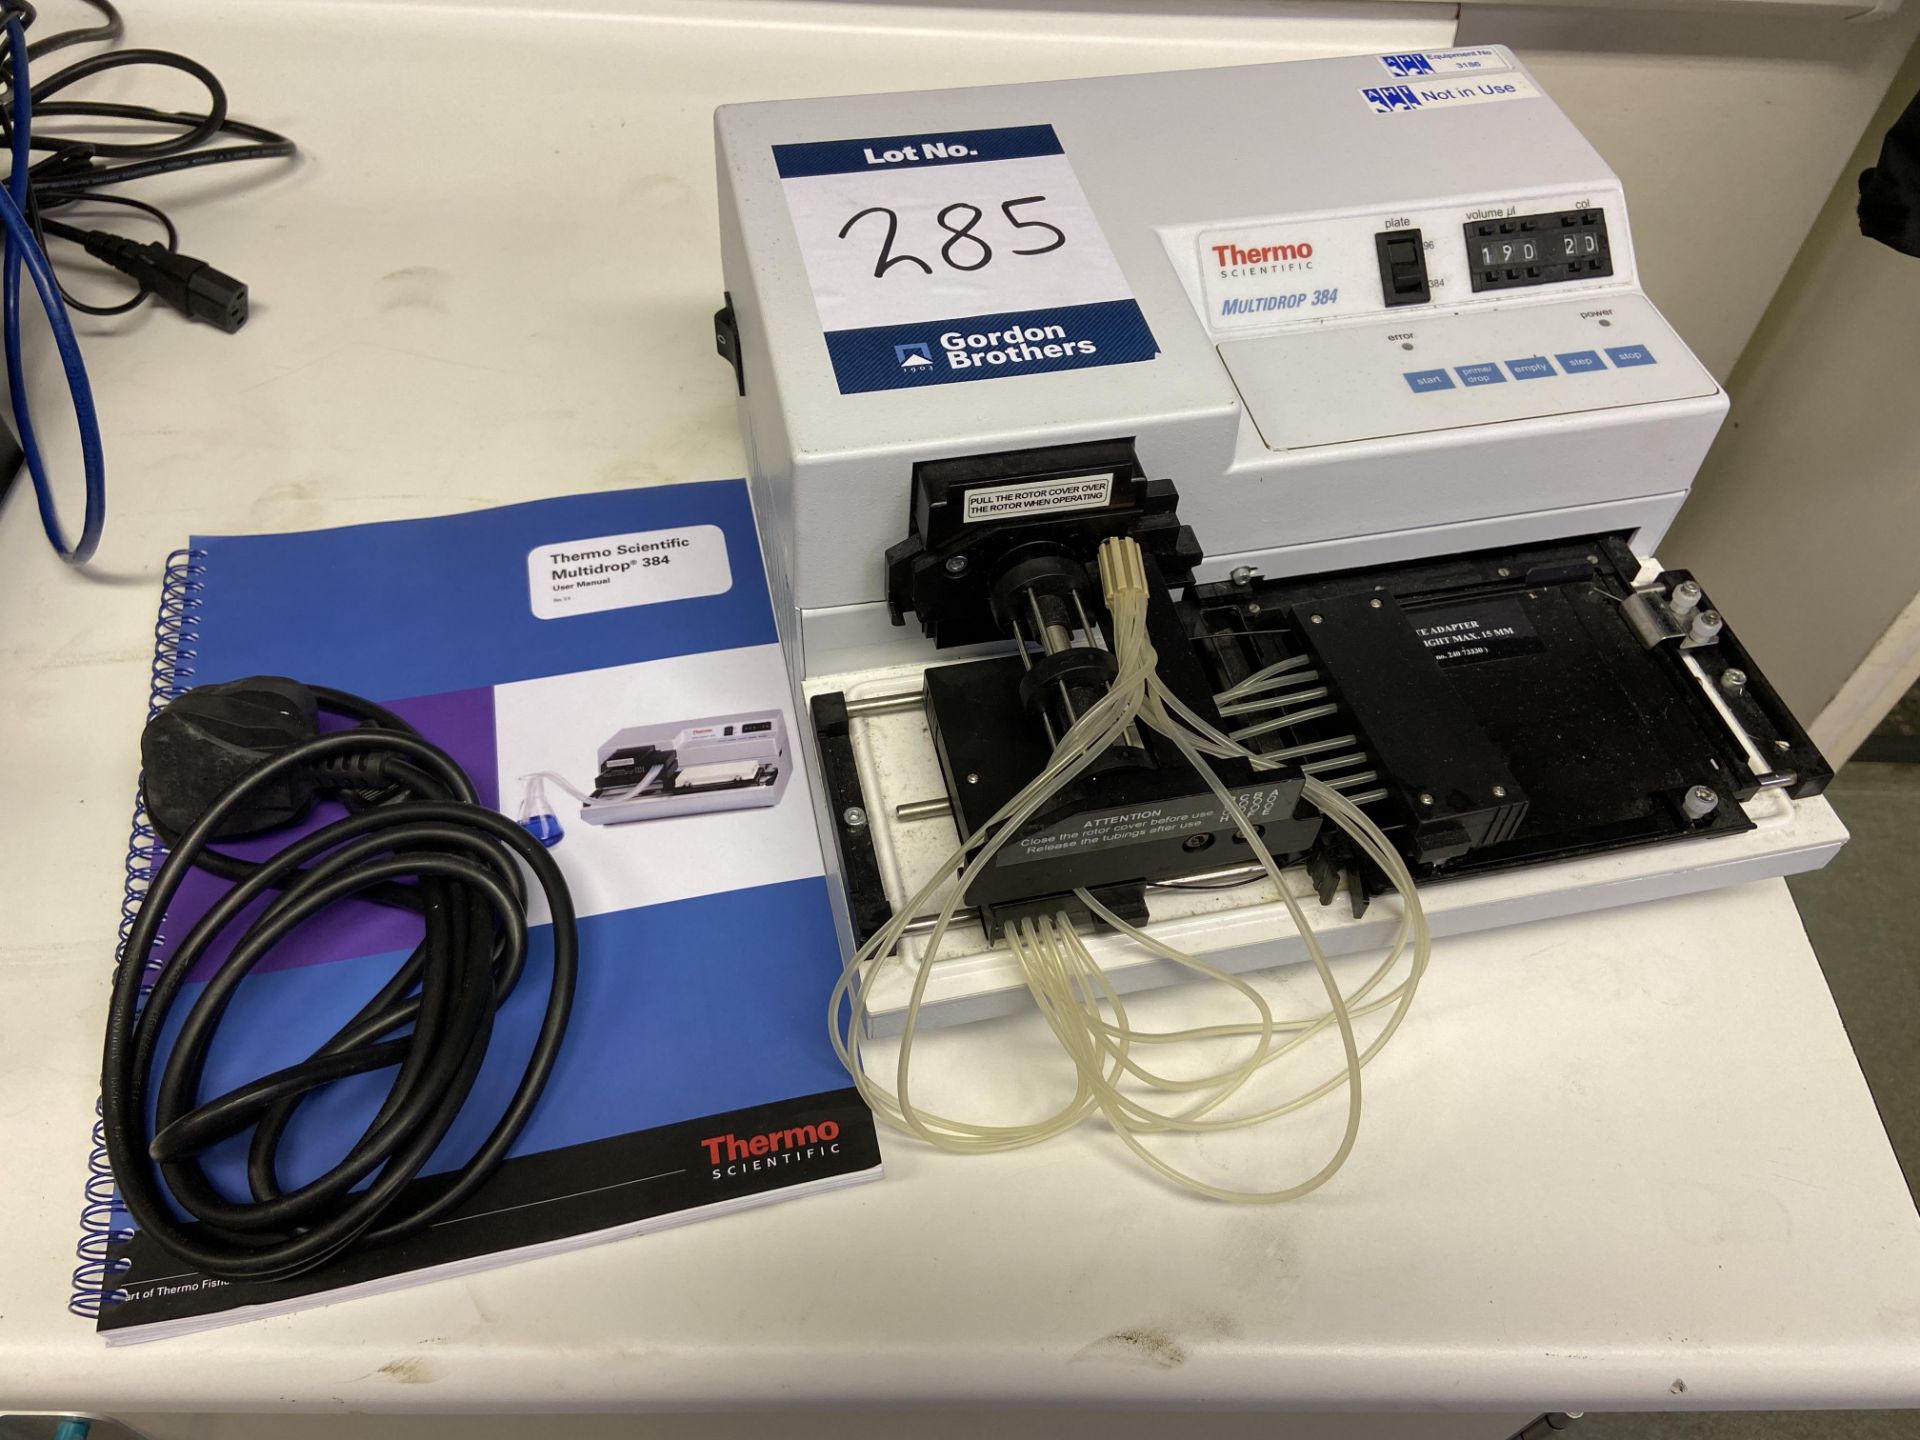 Thermo Scientific Multidrop 384 automated microplate dispenser, Serial No. 832005-414 (2012) with